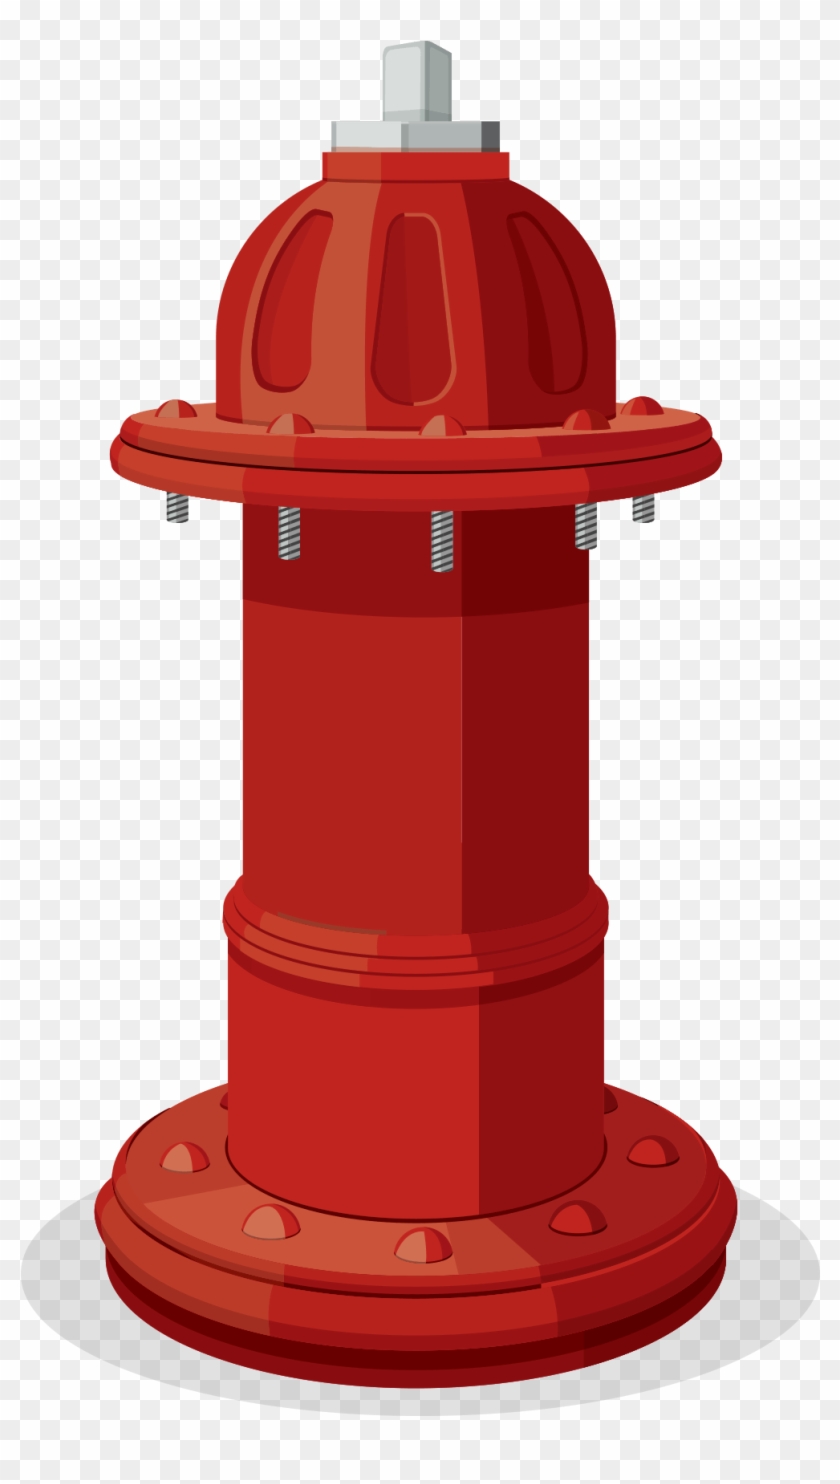 Download - Fire Hydrant Clipart #1278842